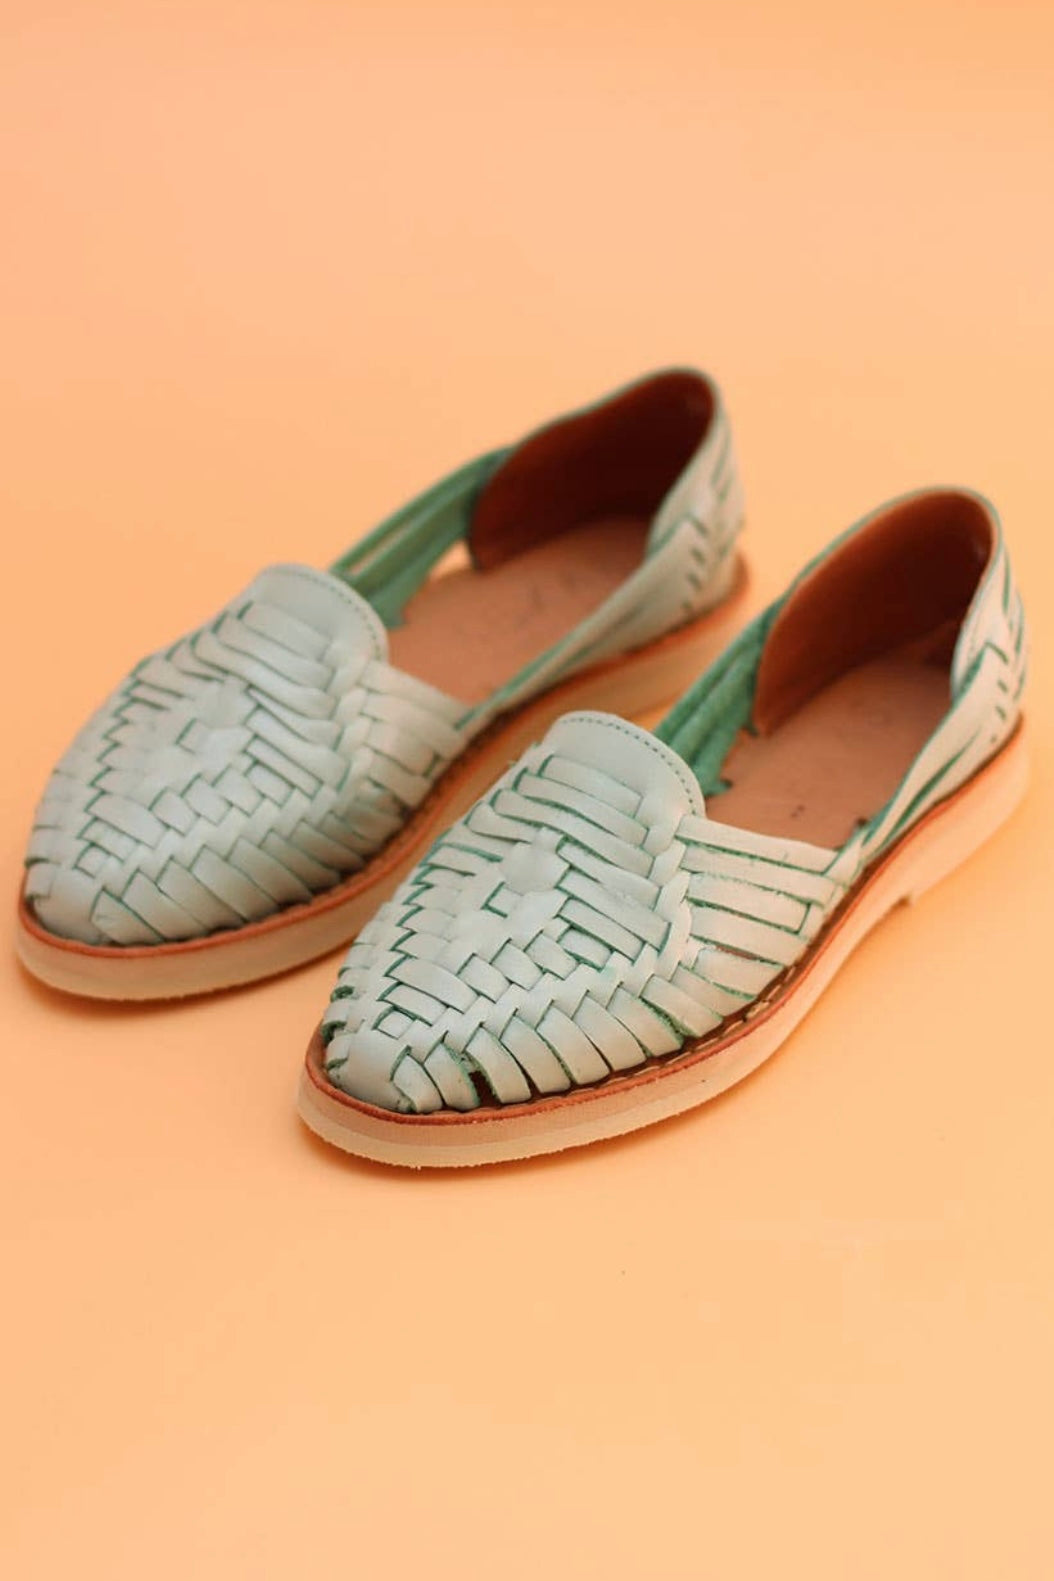 MEXAS Bacalar Leather Sandals